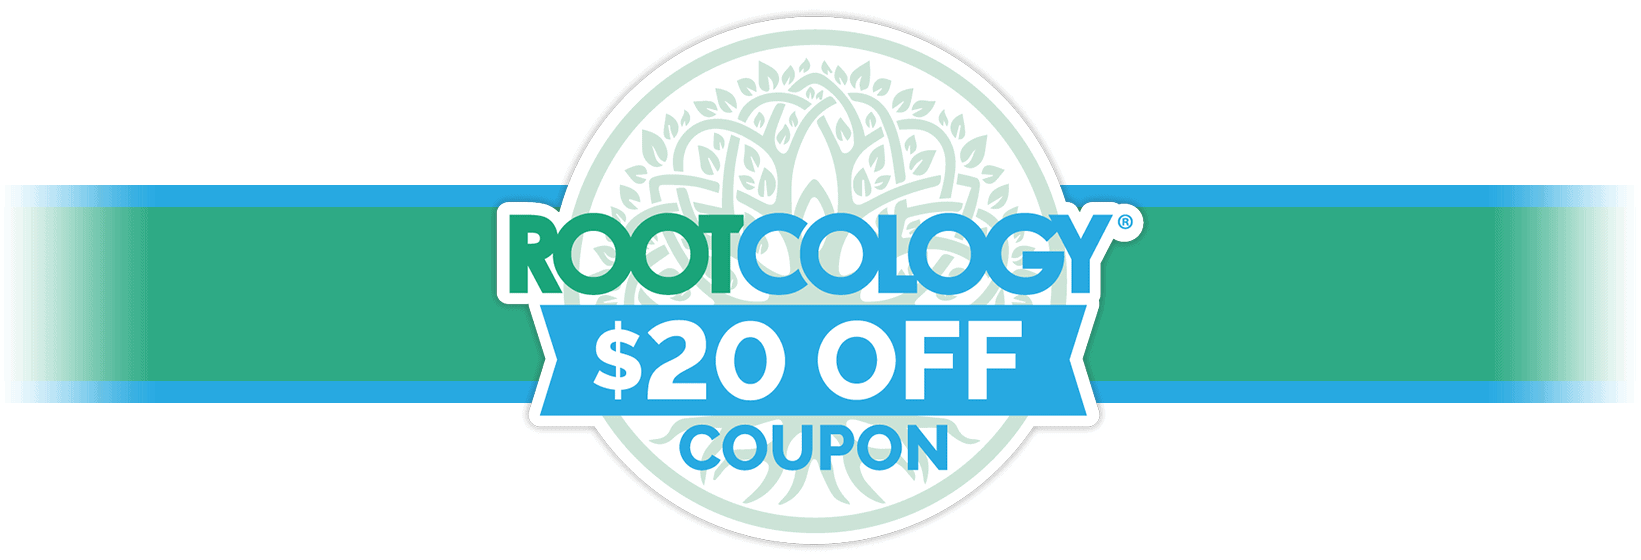 Rootcology_Coupon